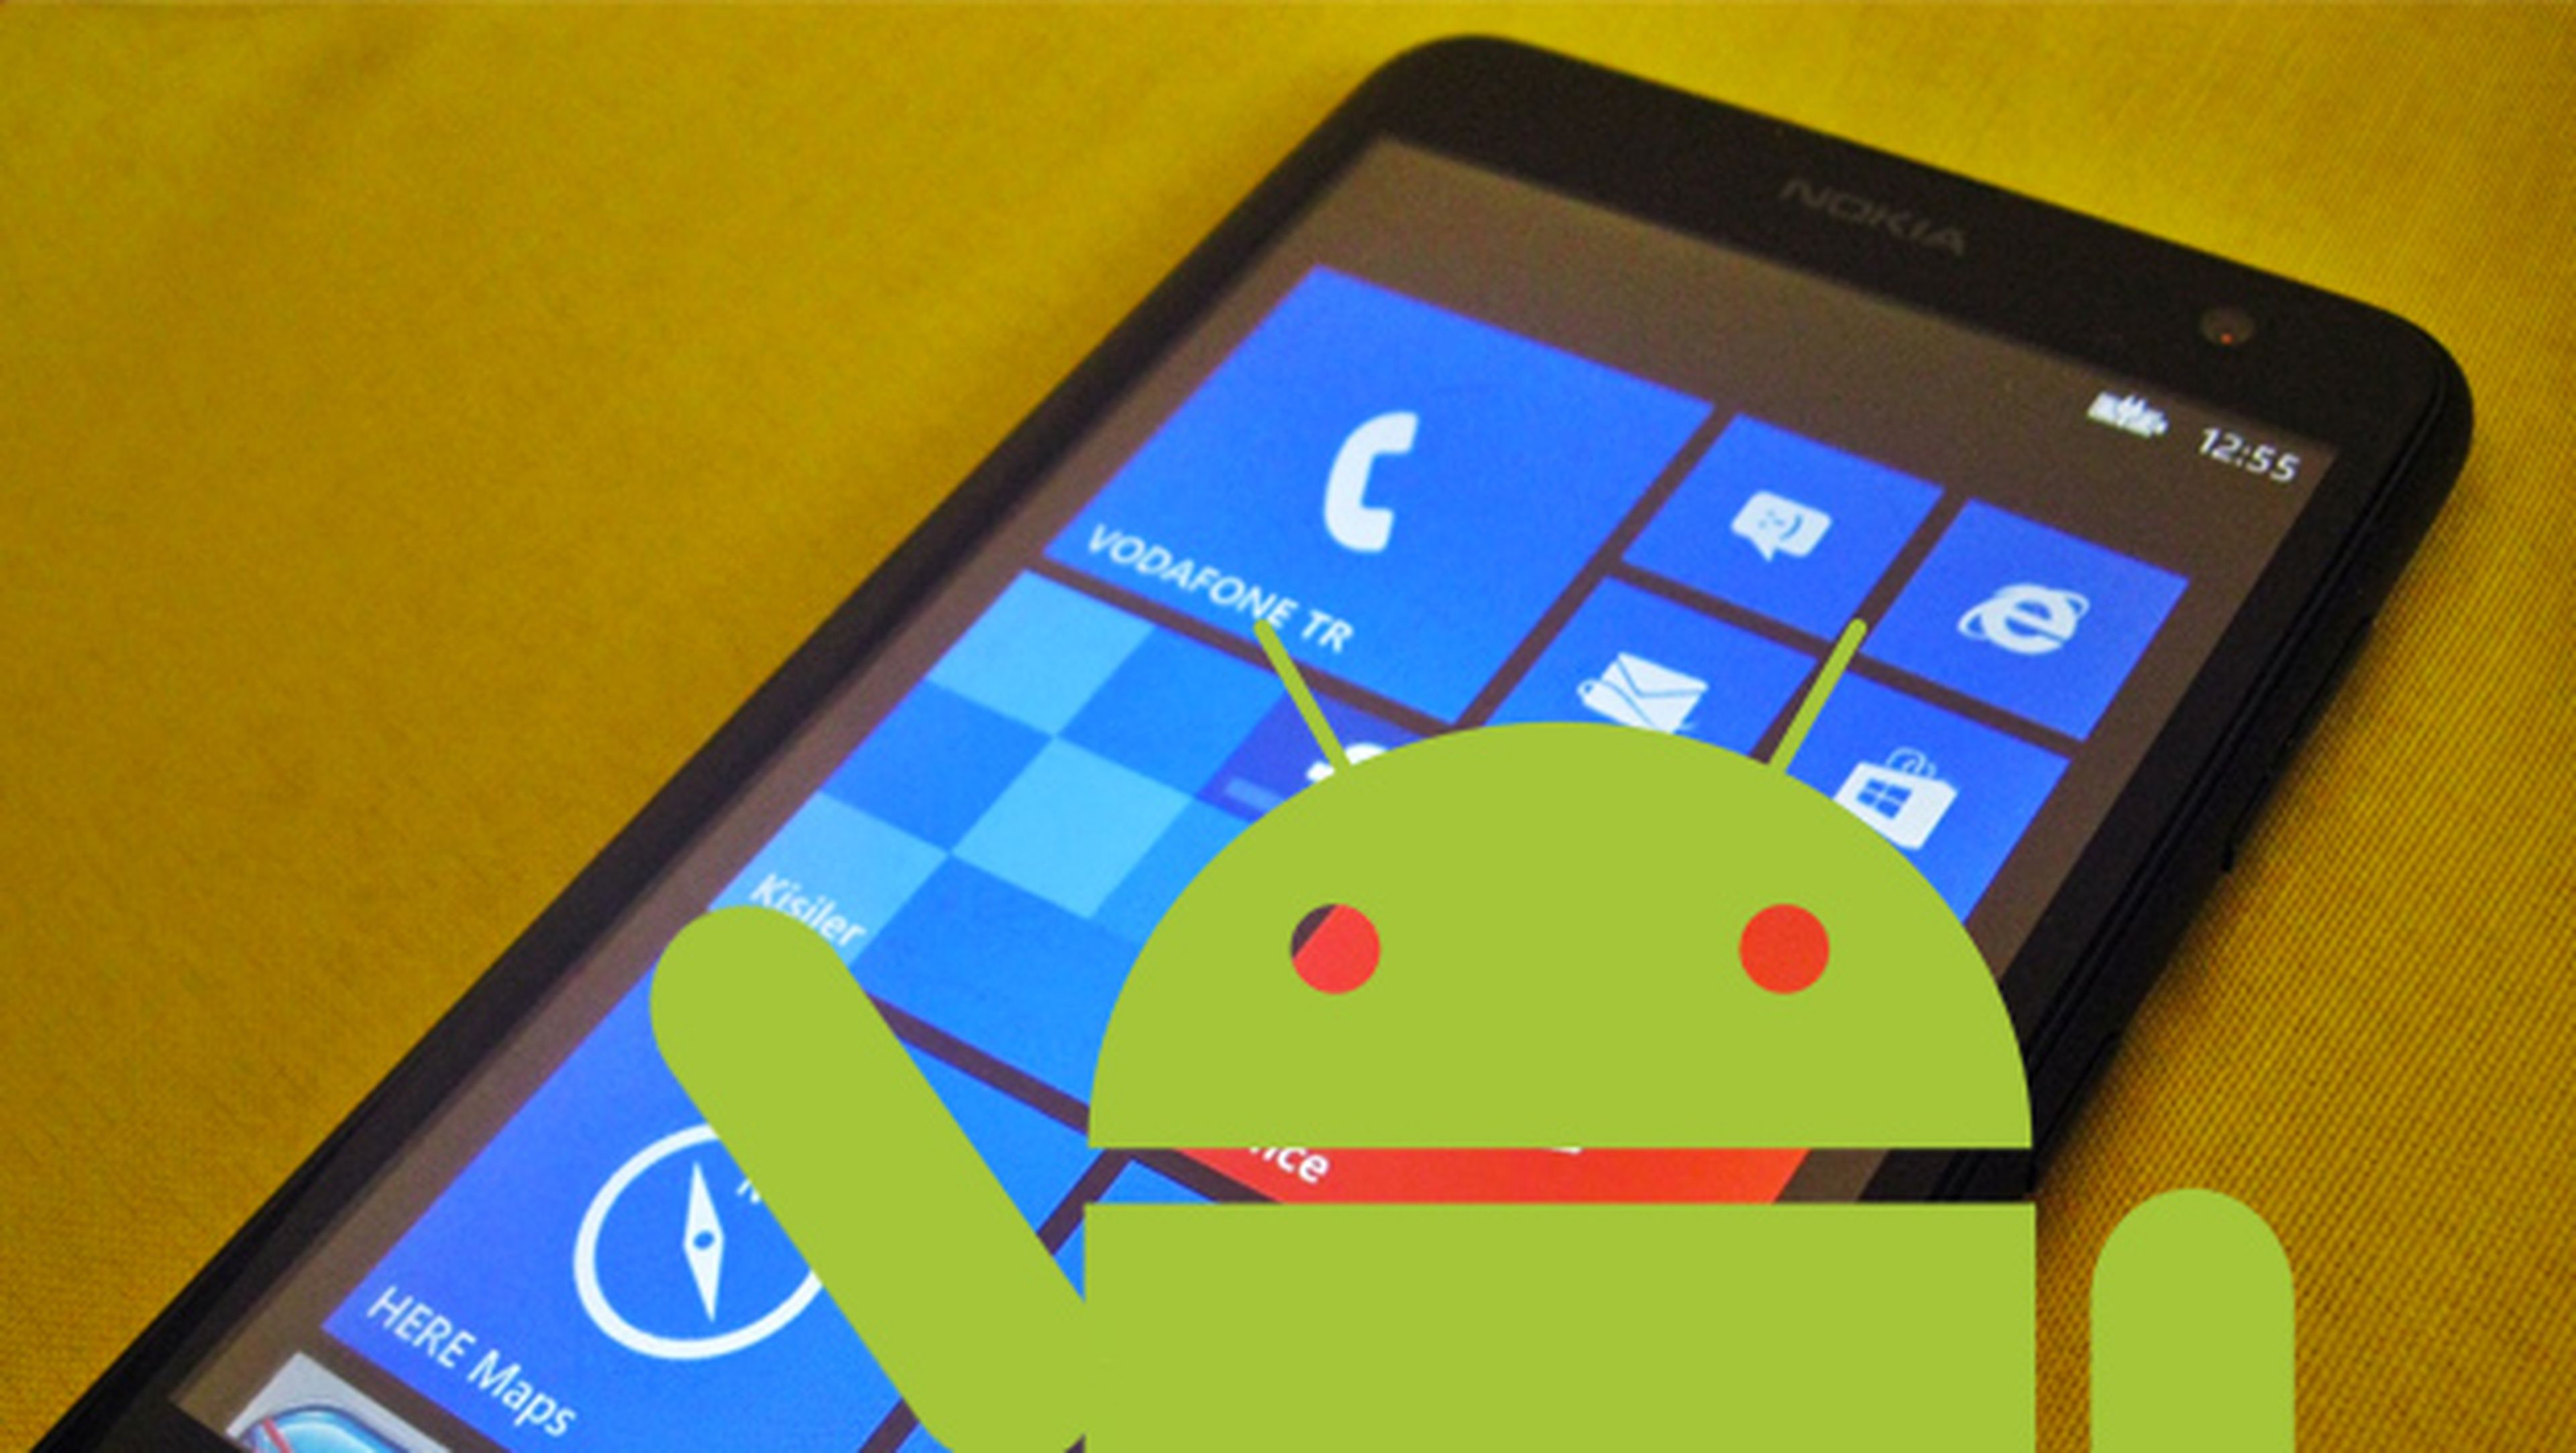 windows phone apps android